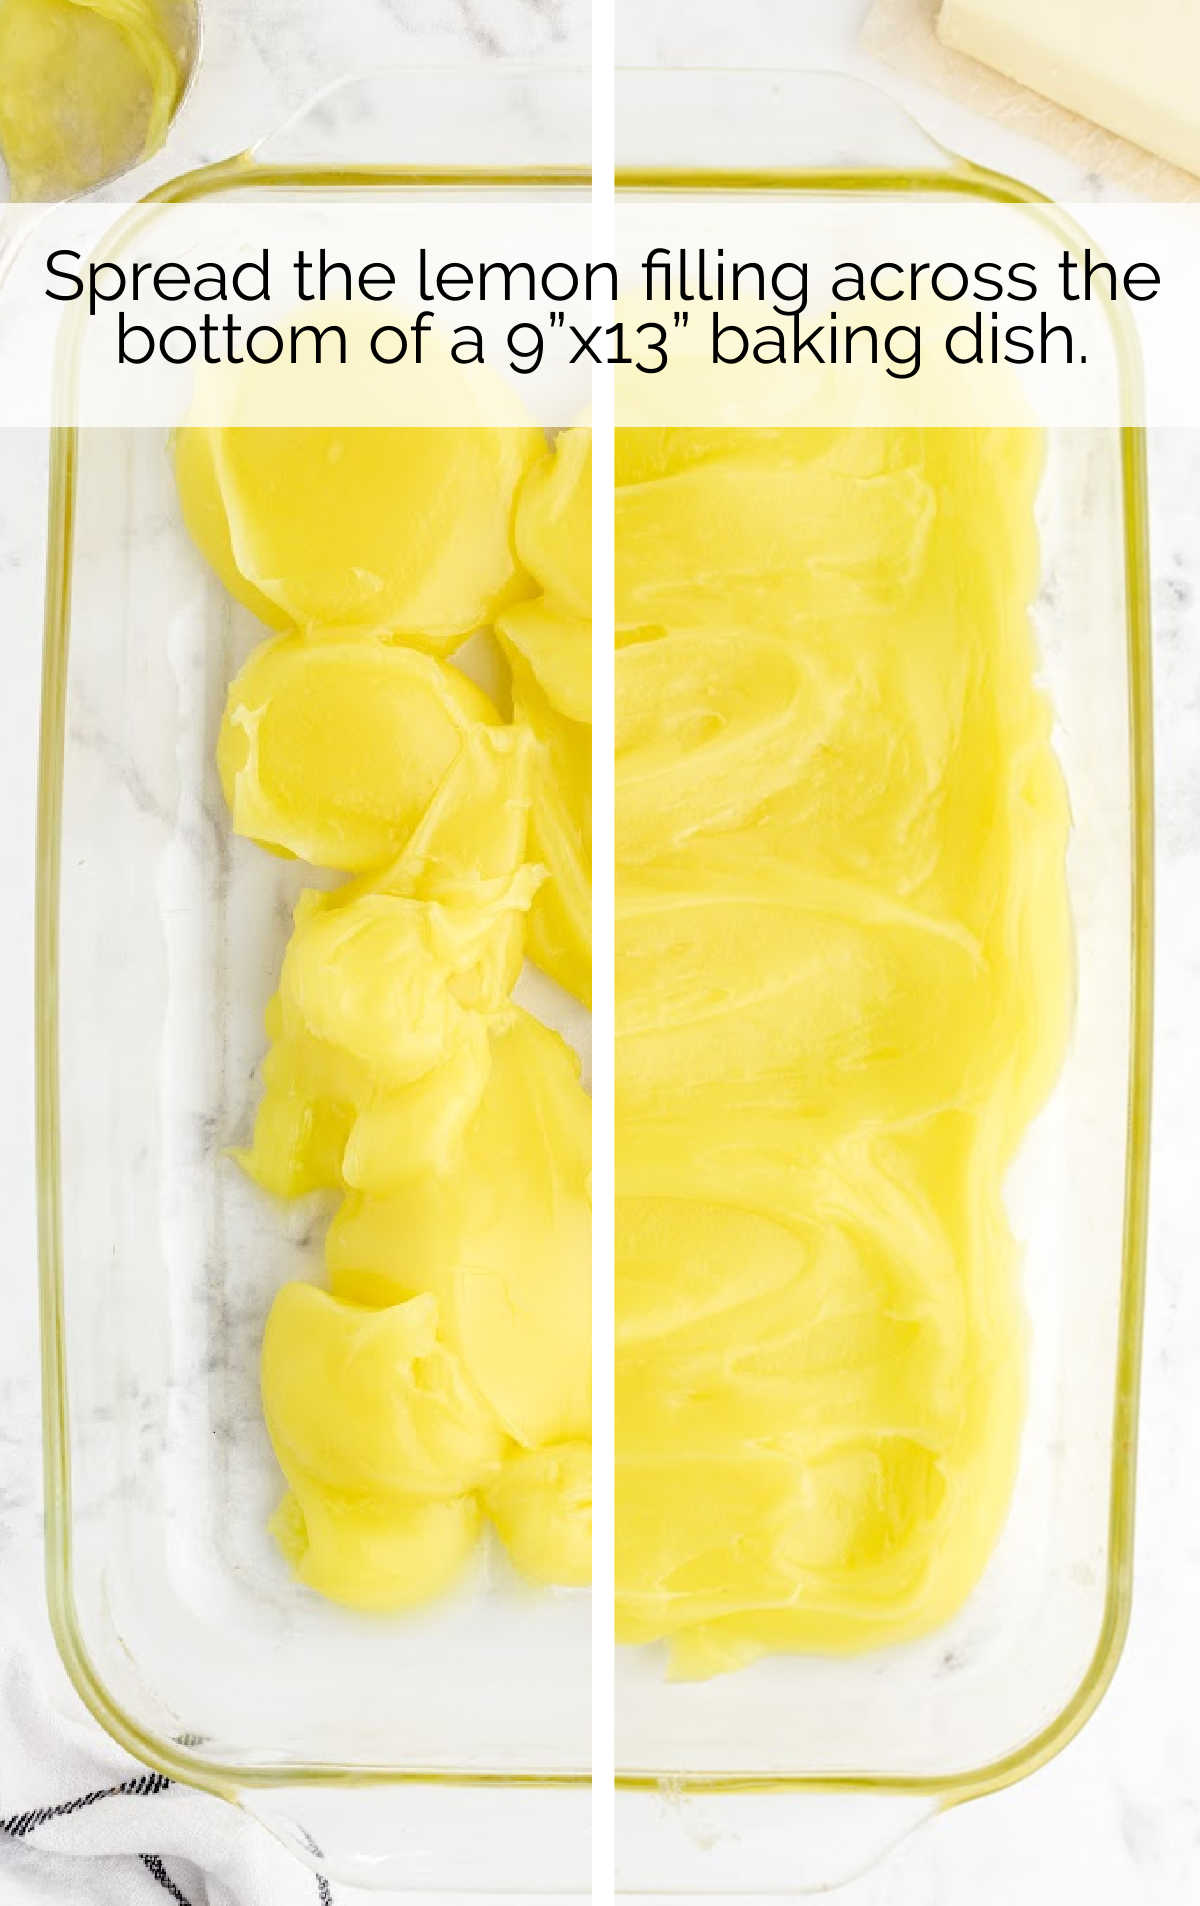 lemon filling spread on the bottom of a baking dish